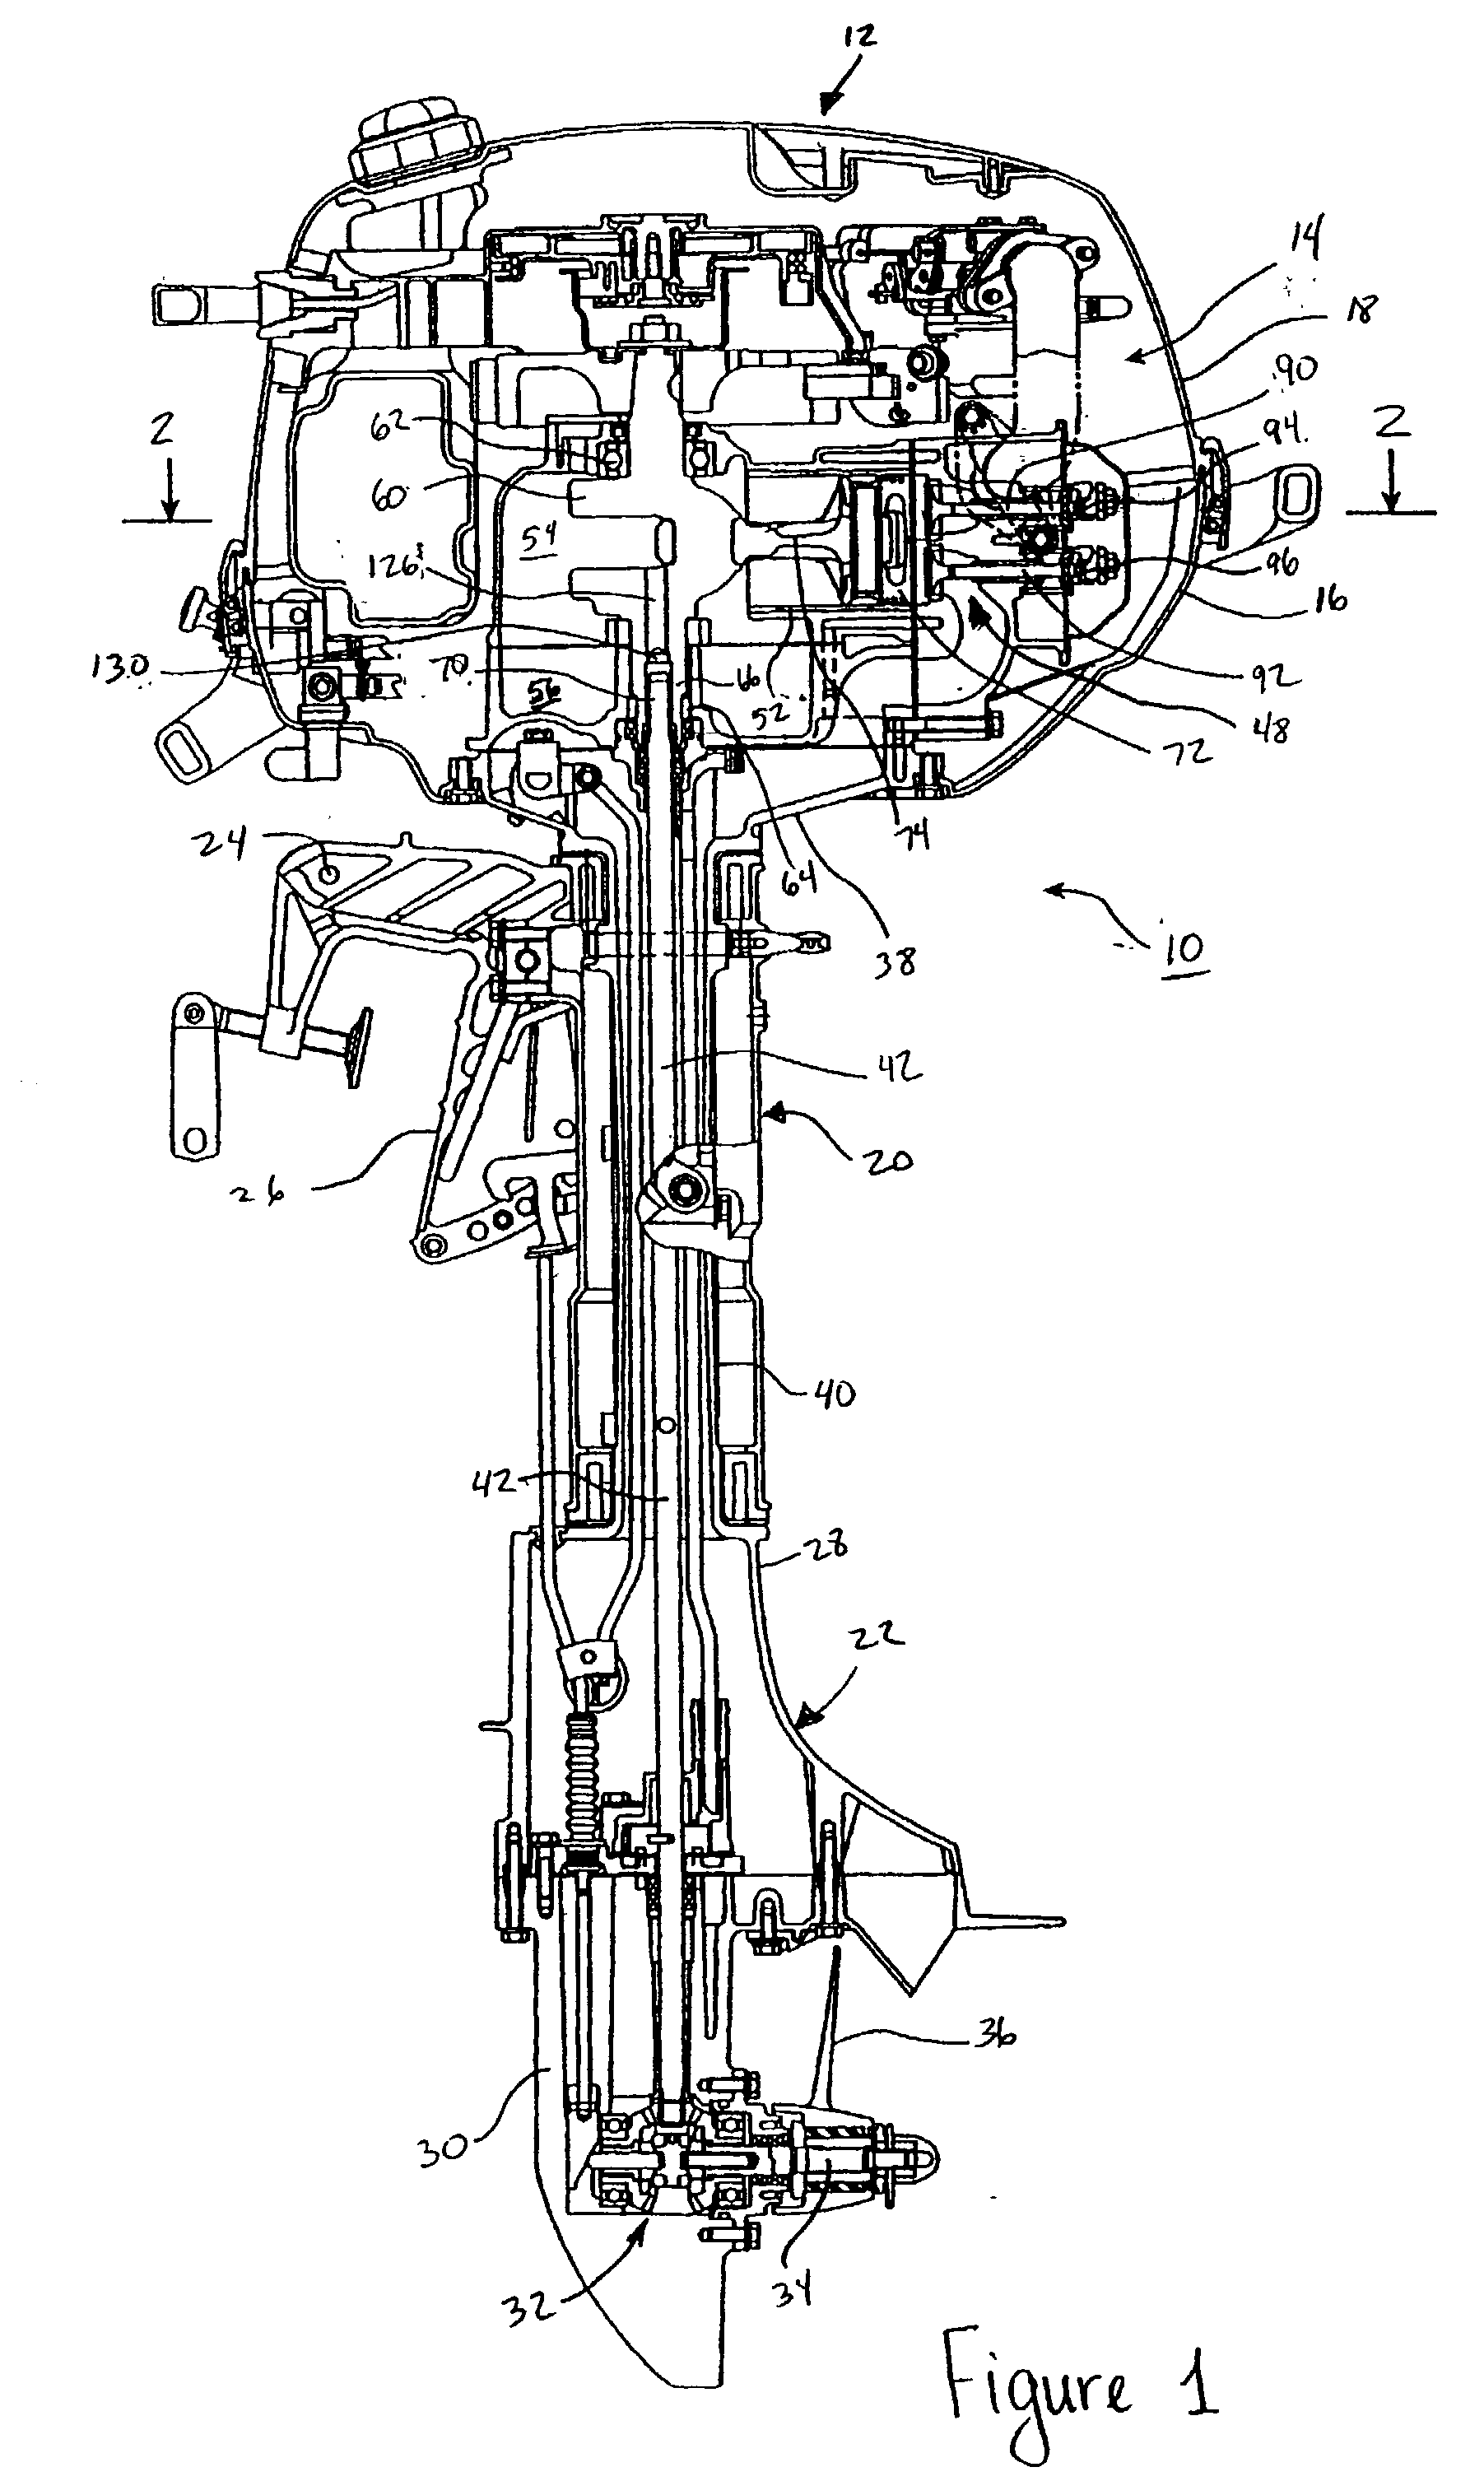 Lubrication system for outboard motor shaft coupling